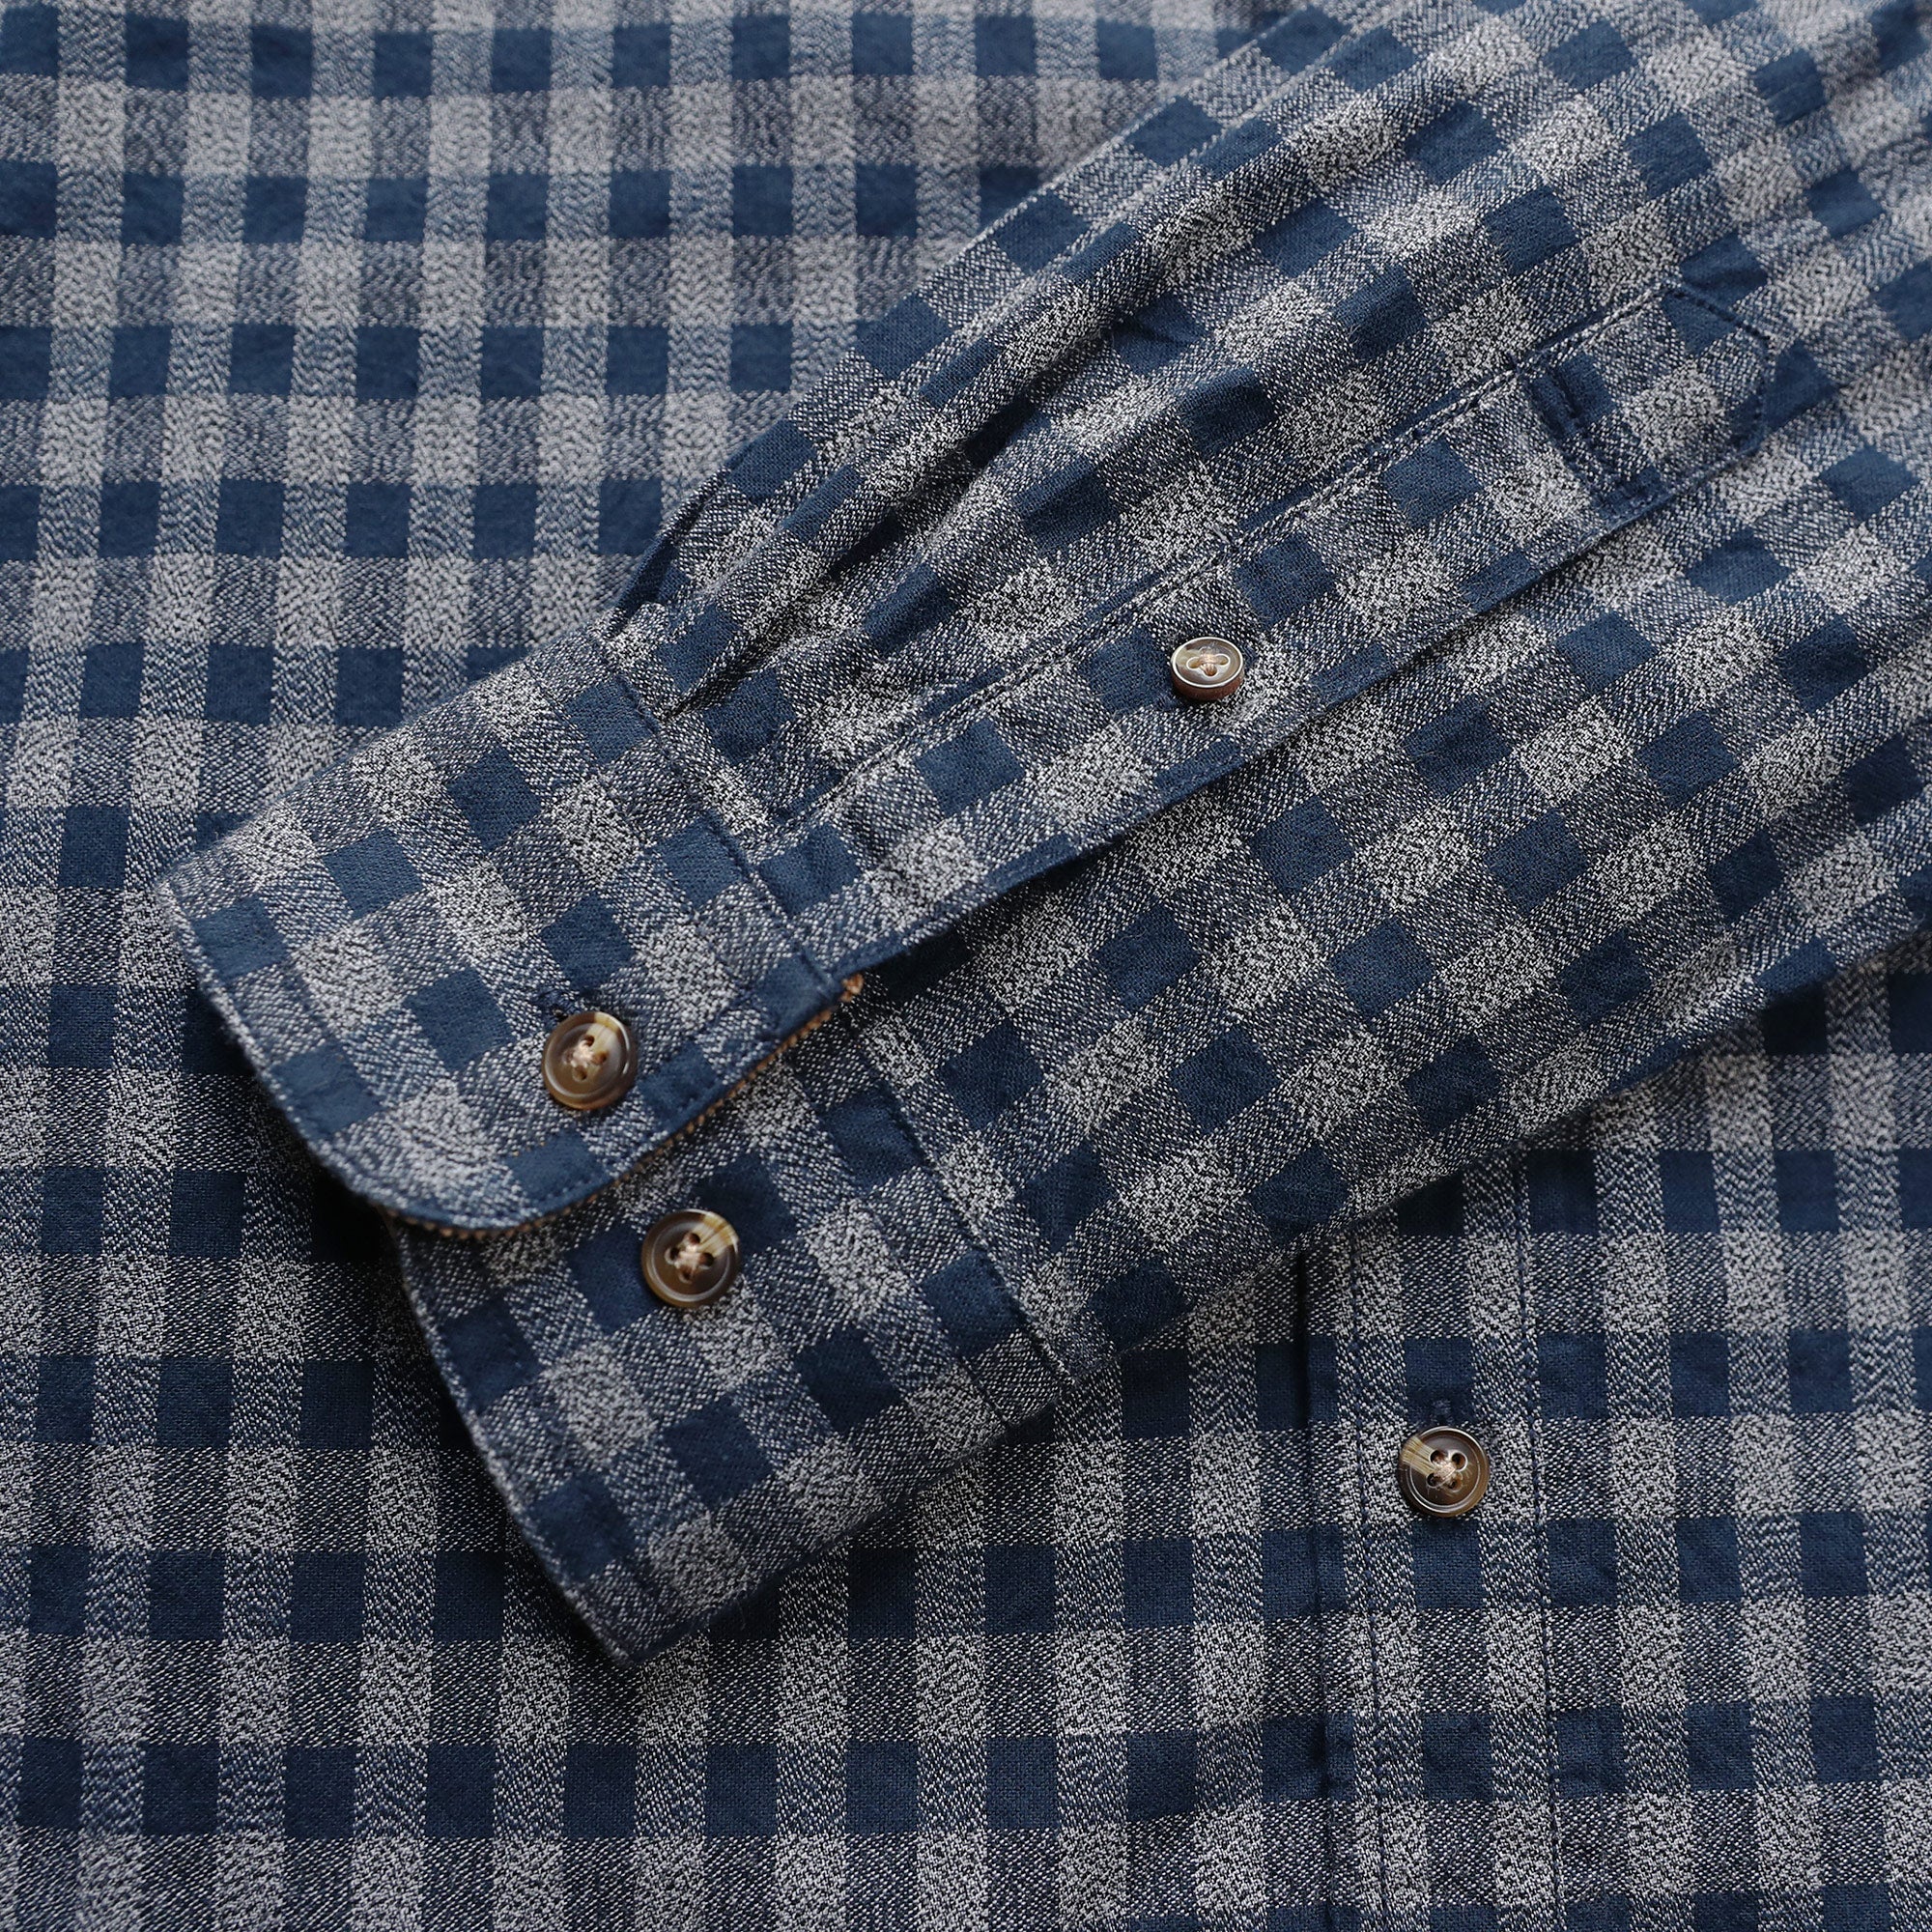 Flannel Shirt for Men Casual Button Down Brushed 100% Cotton Shirt #1015